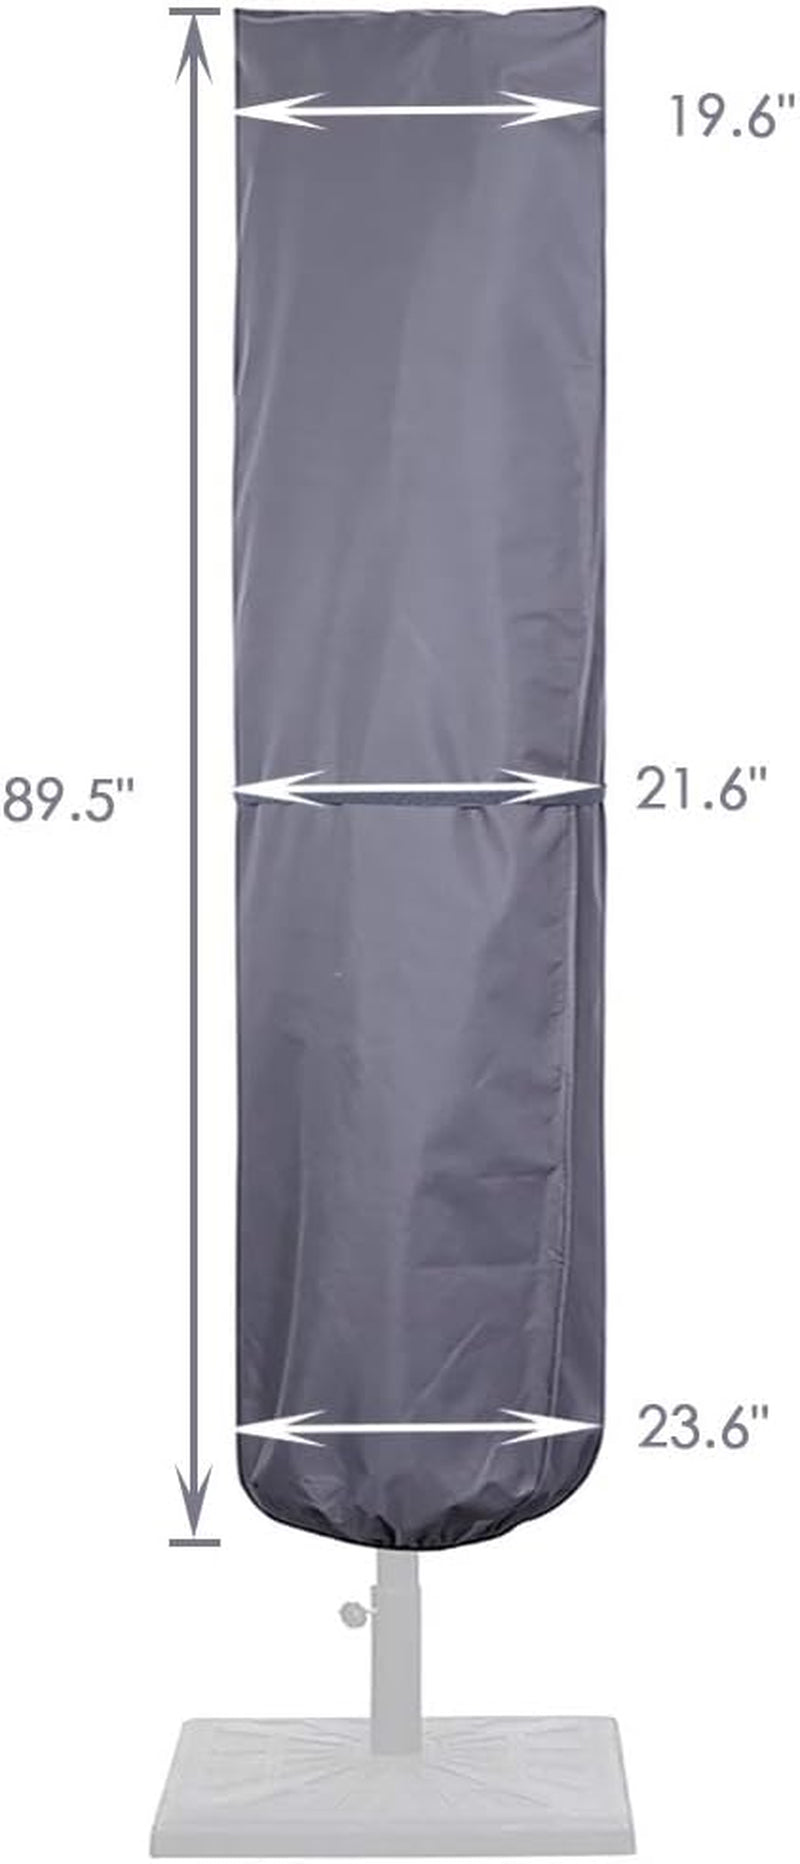 Patio Umbrella Cover with Rod for 7 to 11 Ft Umbrellas & 15 Ft Double-Sided Umbrellas, 600D Protective Waterproof Cover with Zipper, Gray